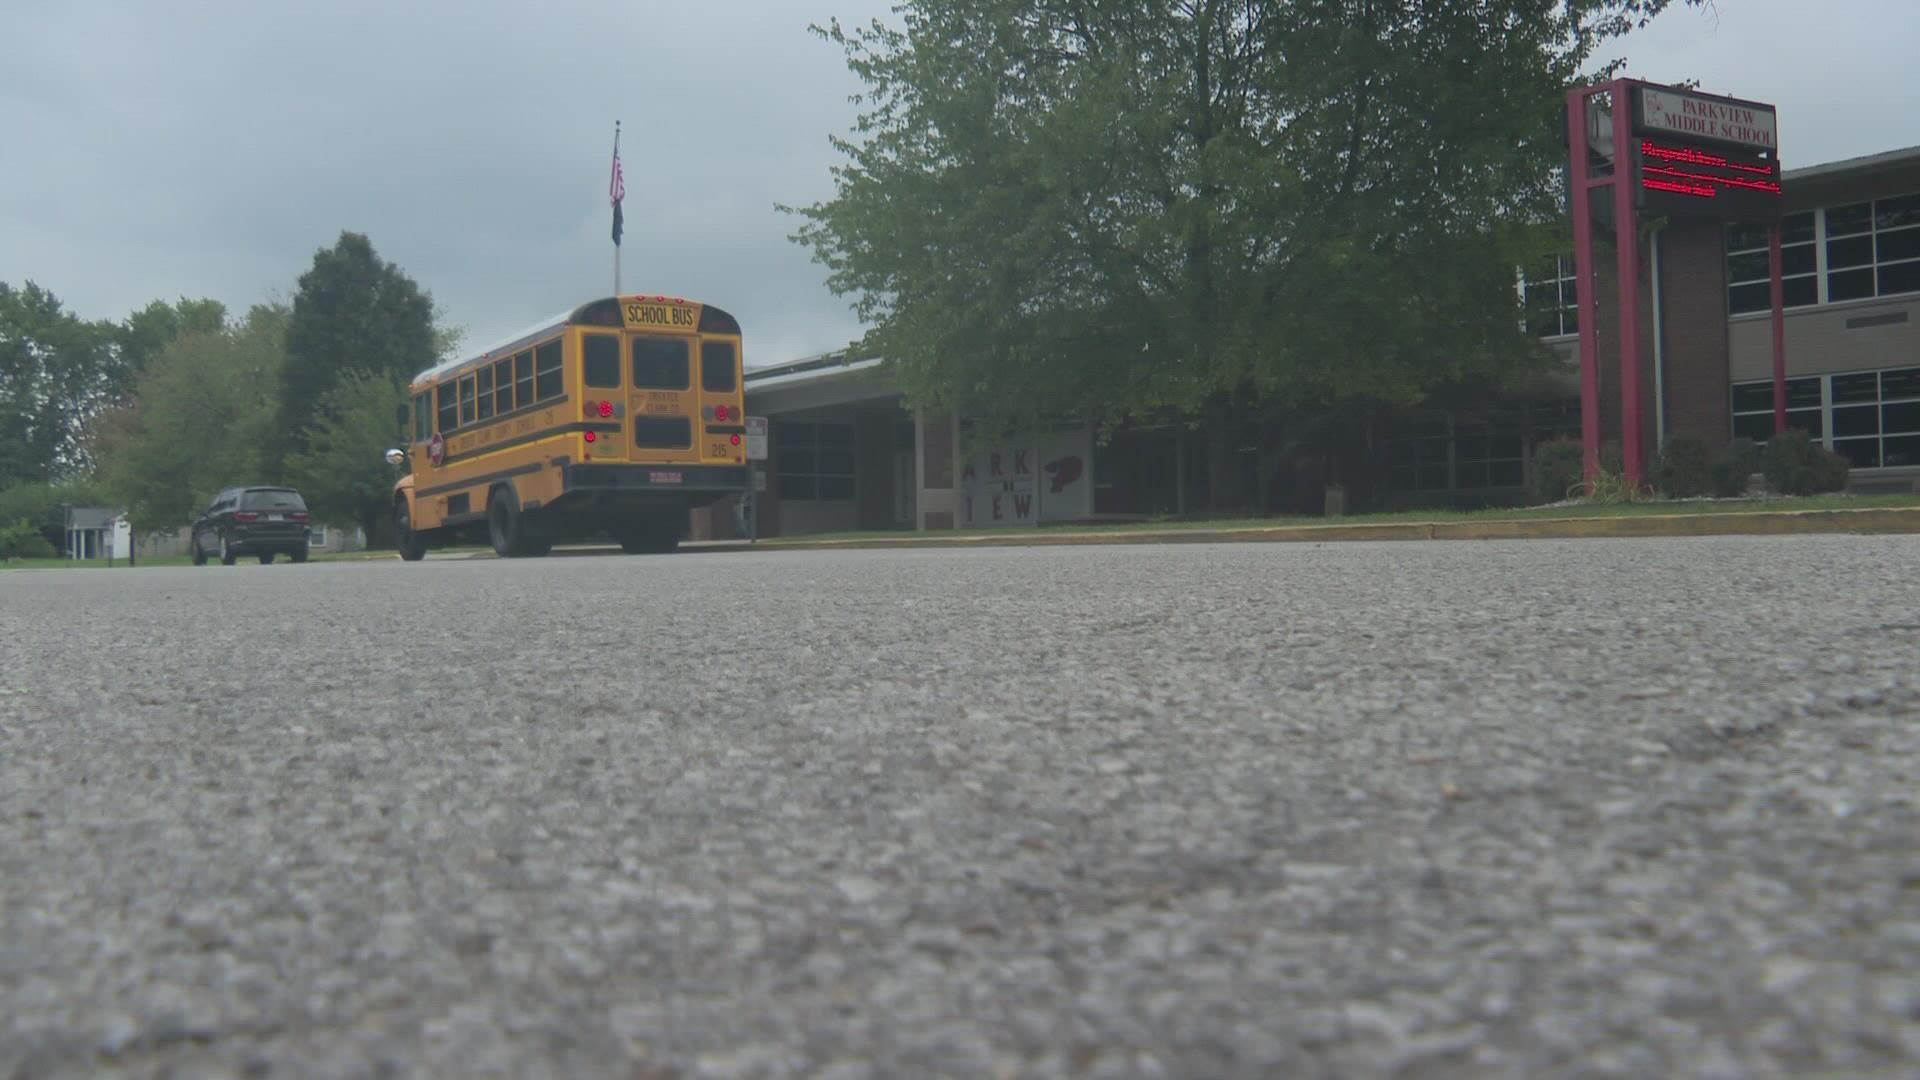 When attempting to move the school previously, a majority of Jeffersonville City council denied a rezoning request.